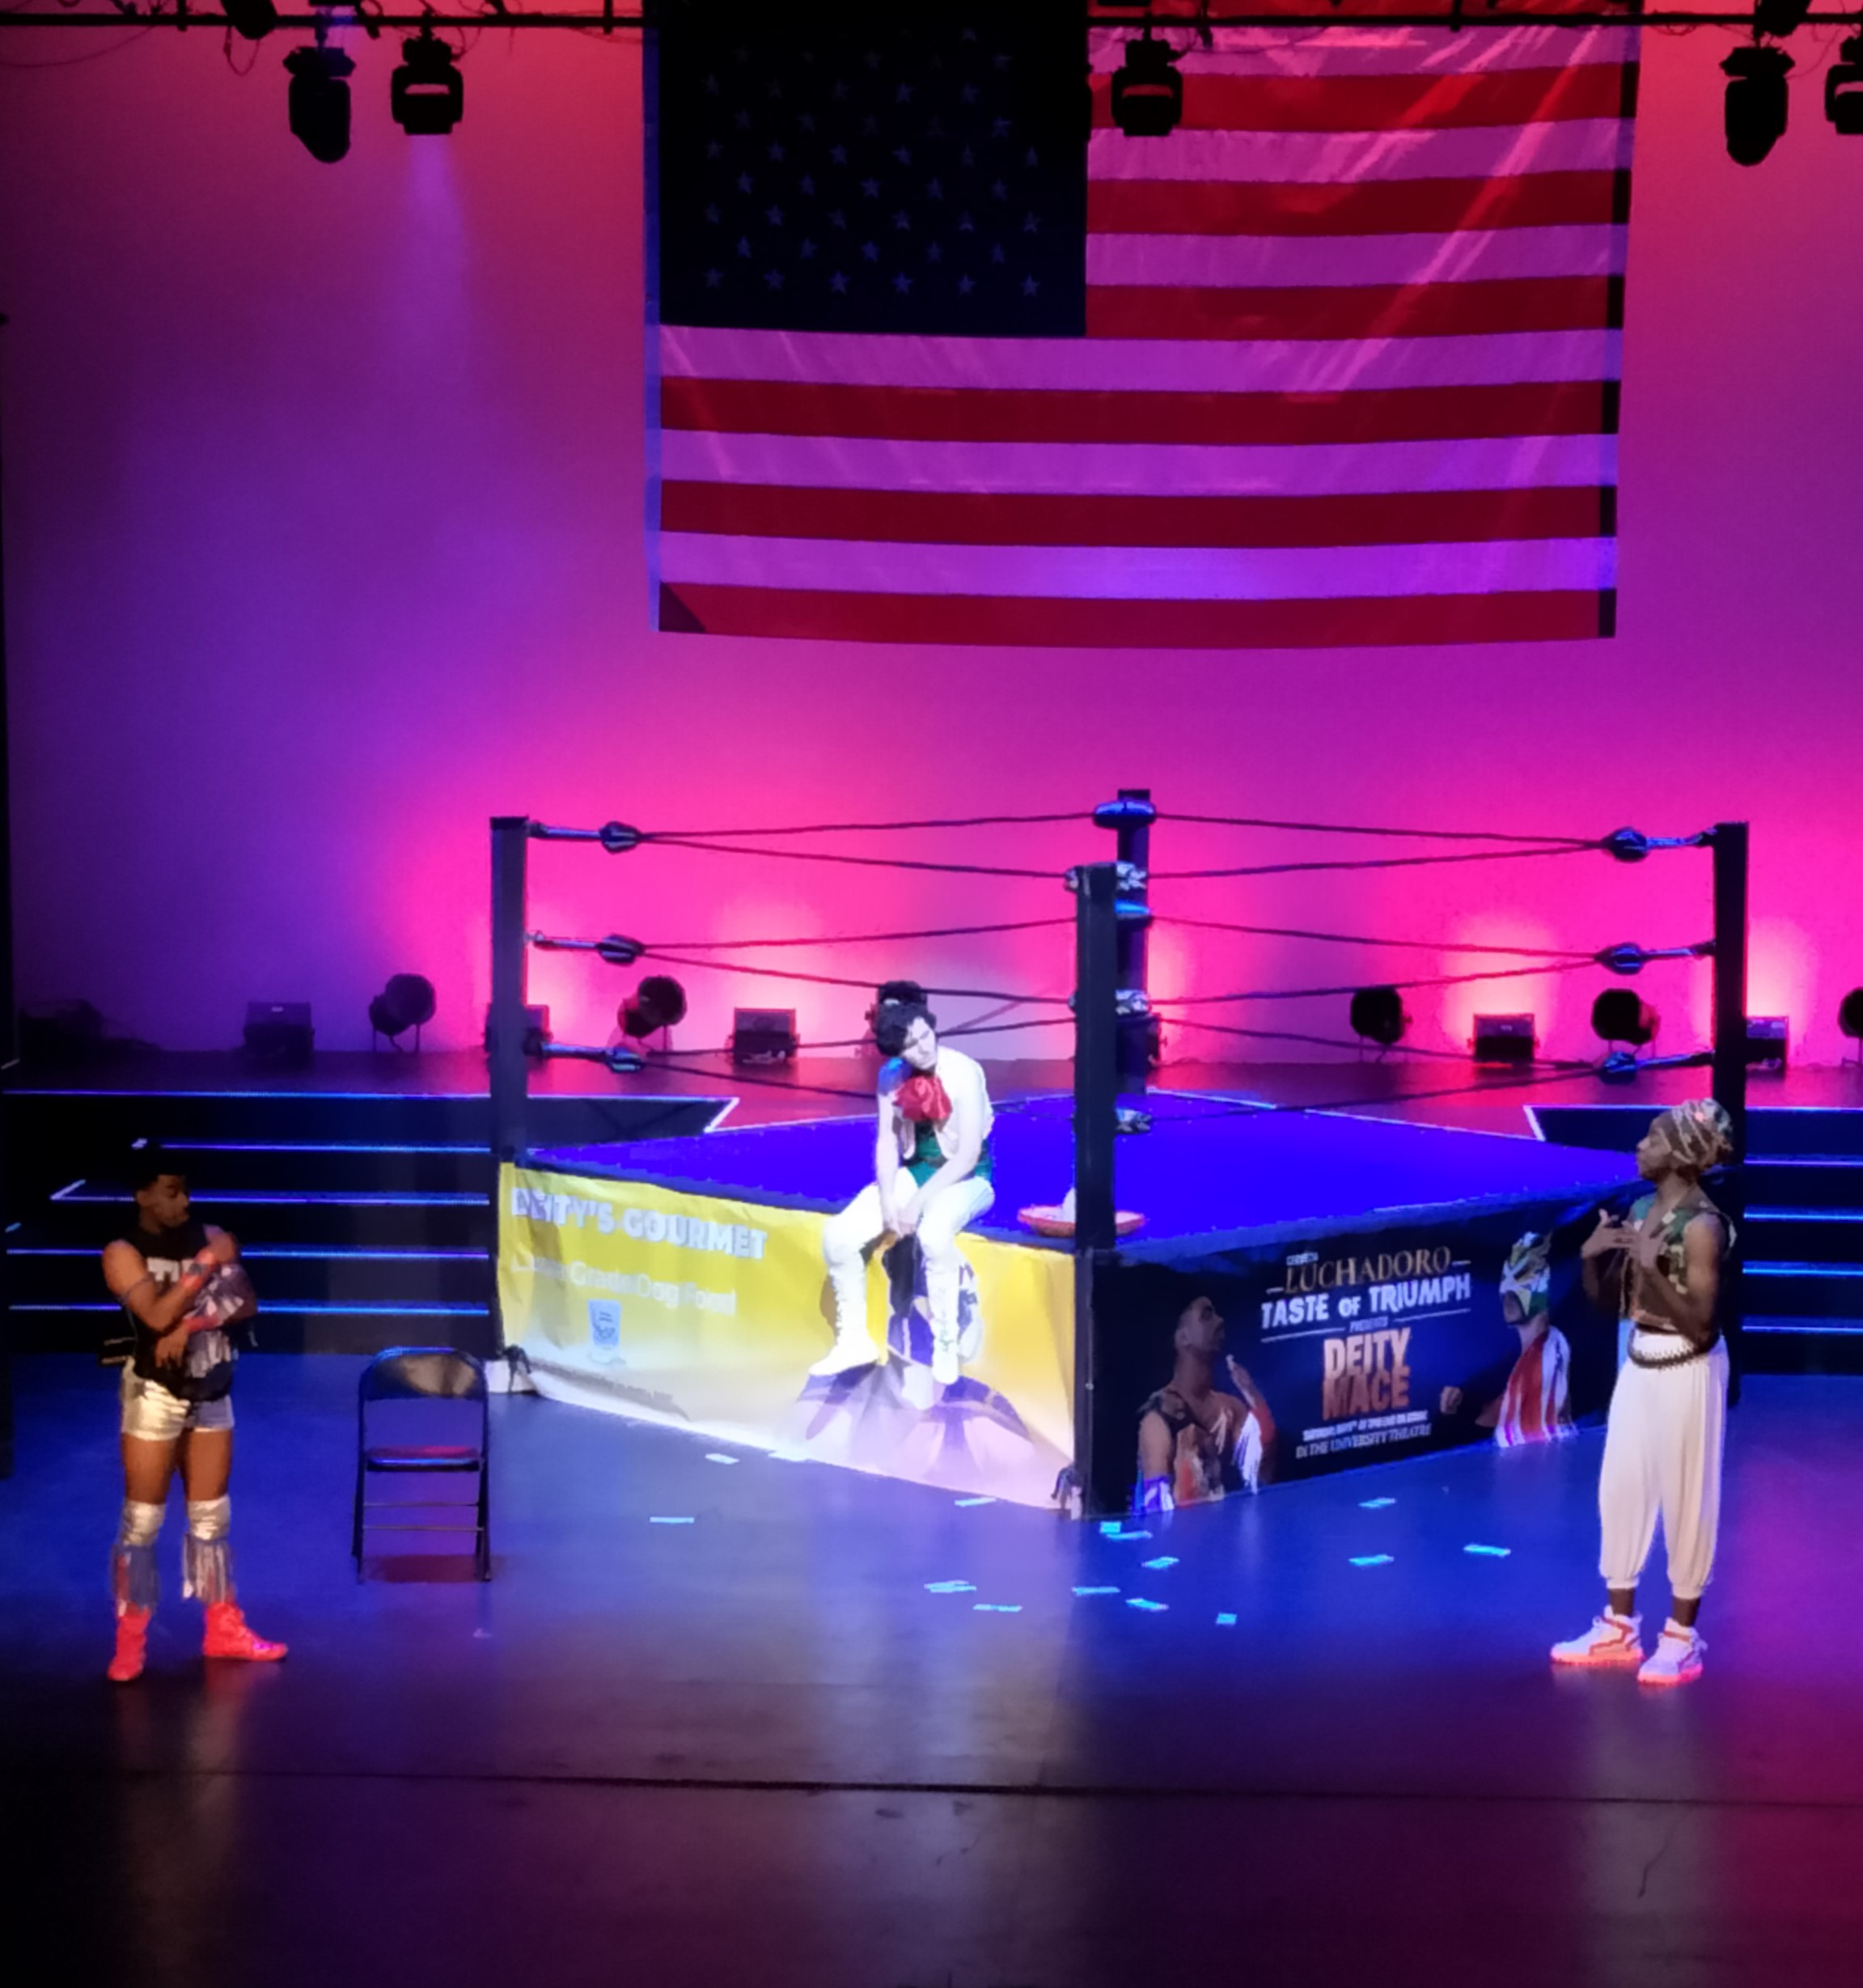 Photo of actors around a wrestling ring bathed in pink and purple light.